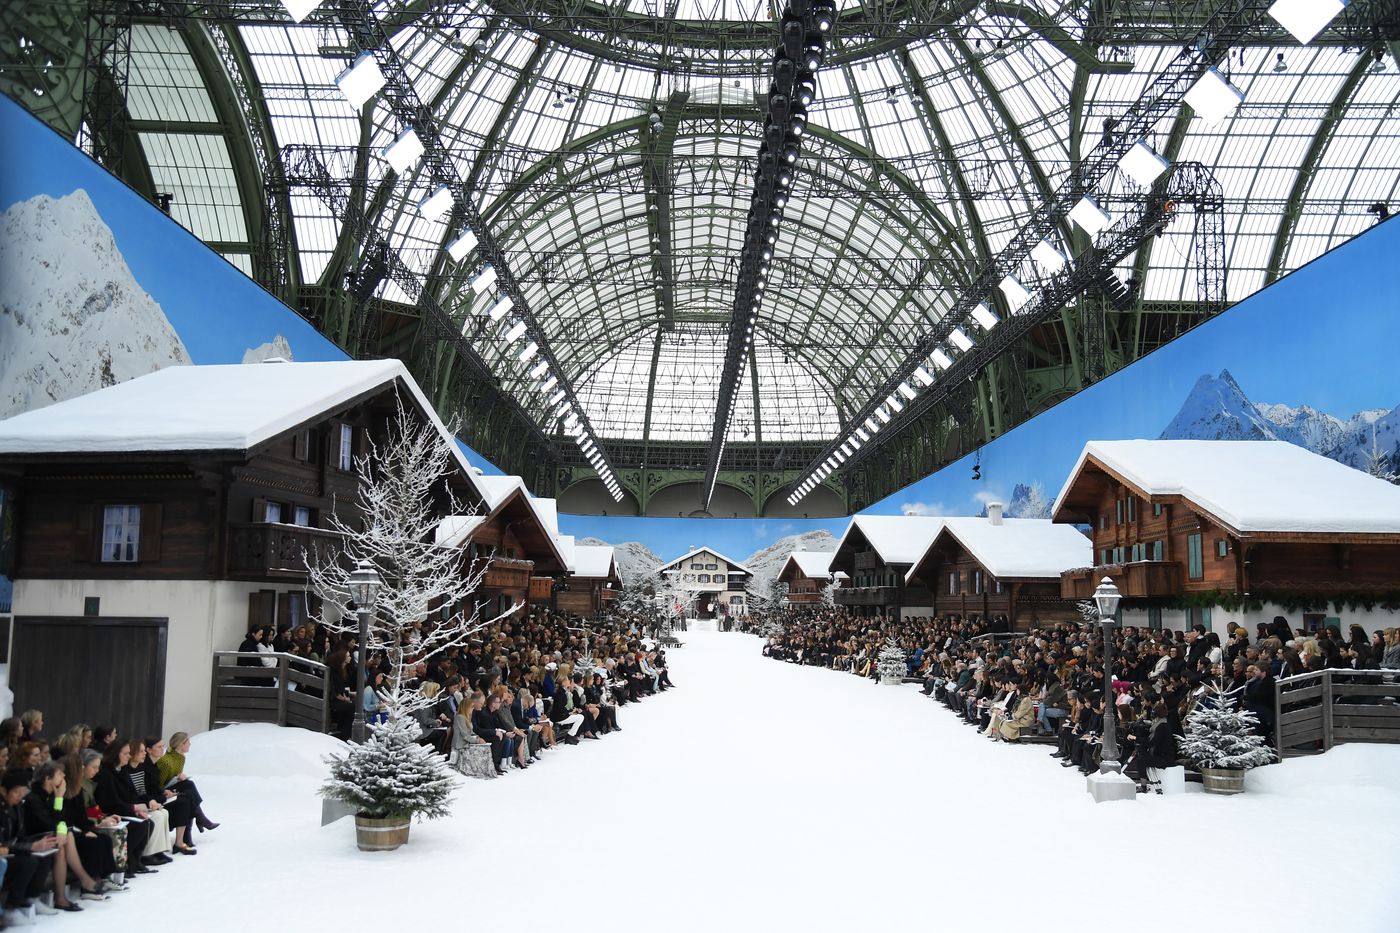 Fashion bids farewell to Karl Lagerfeld at his final Chanel show, Chanel